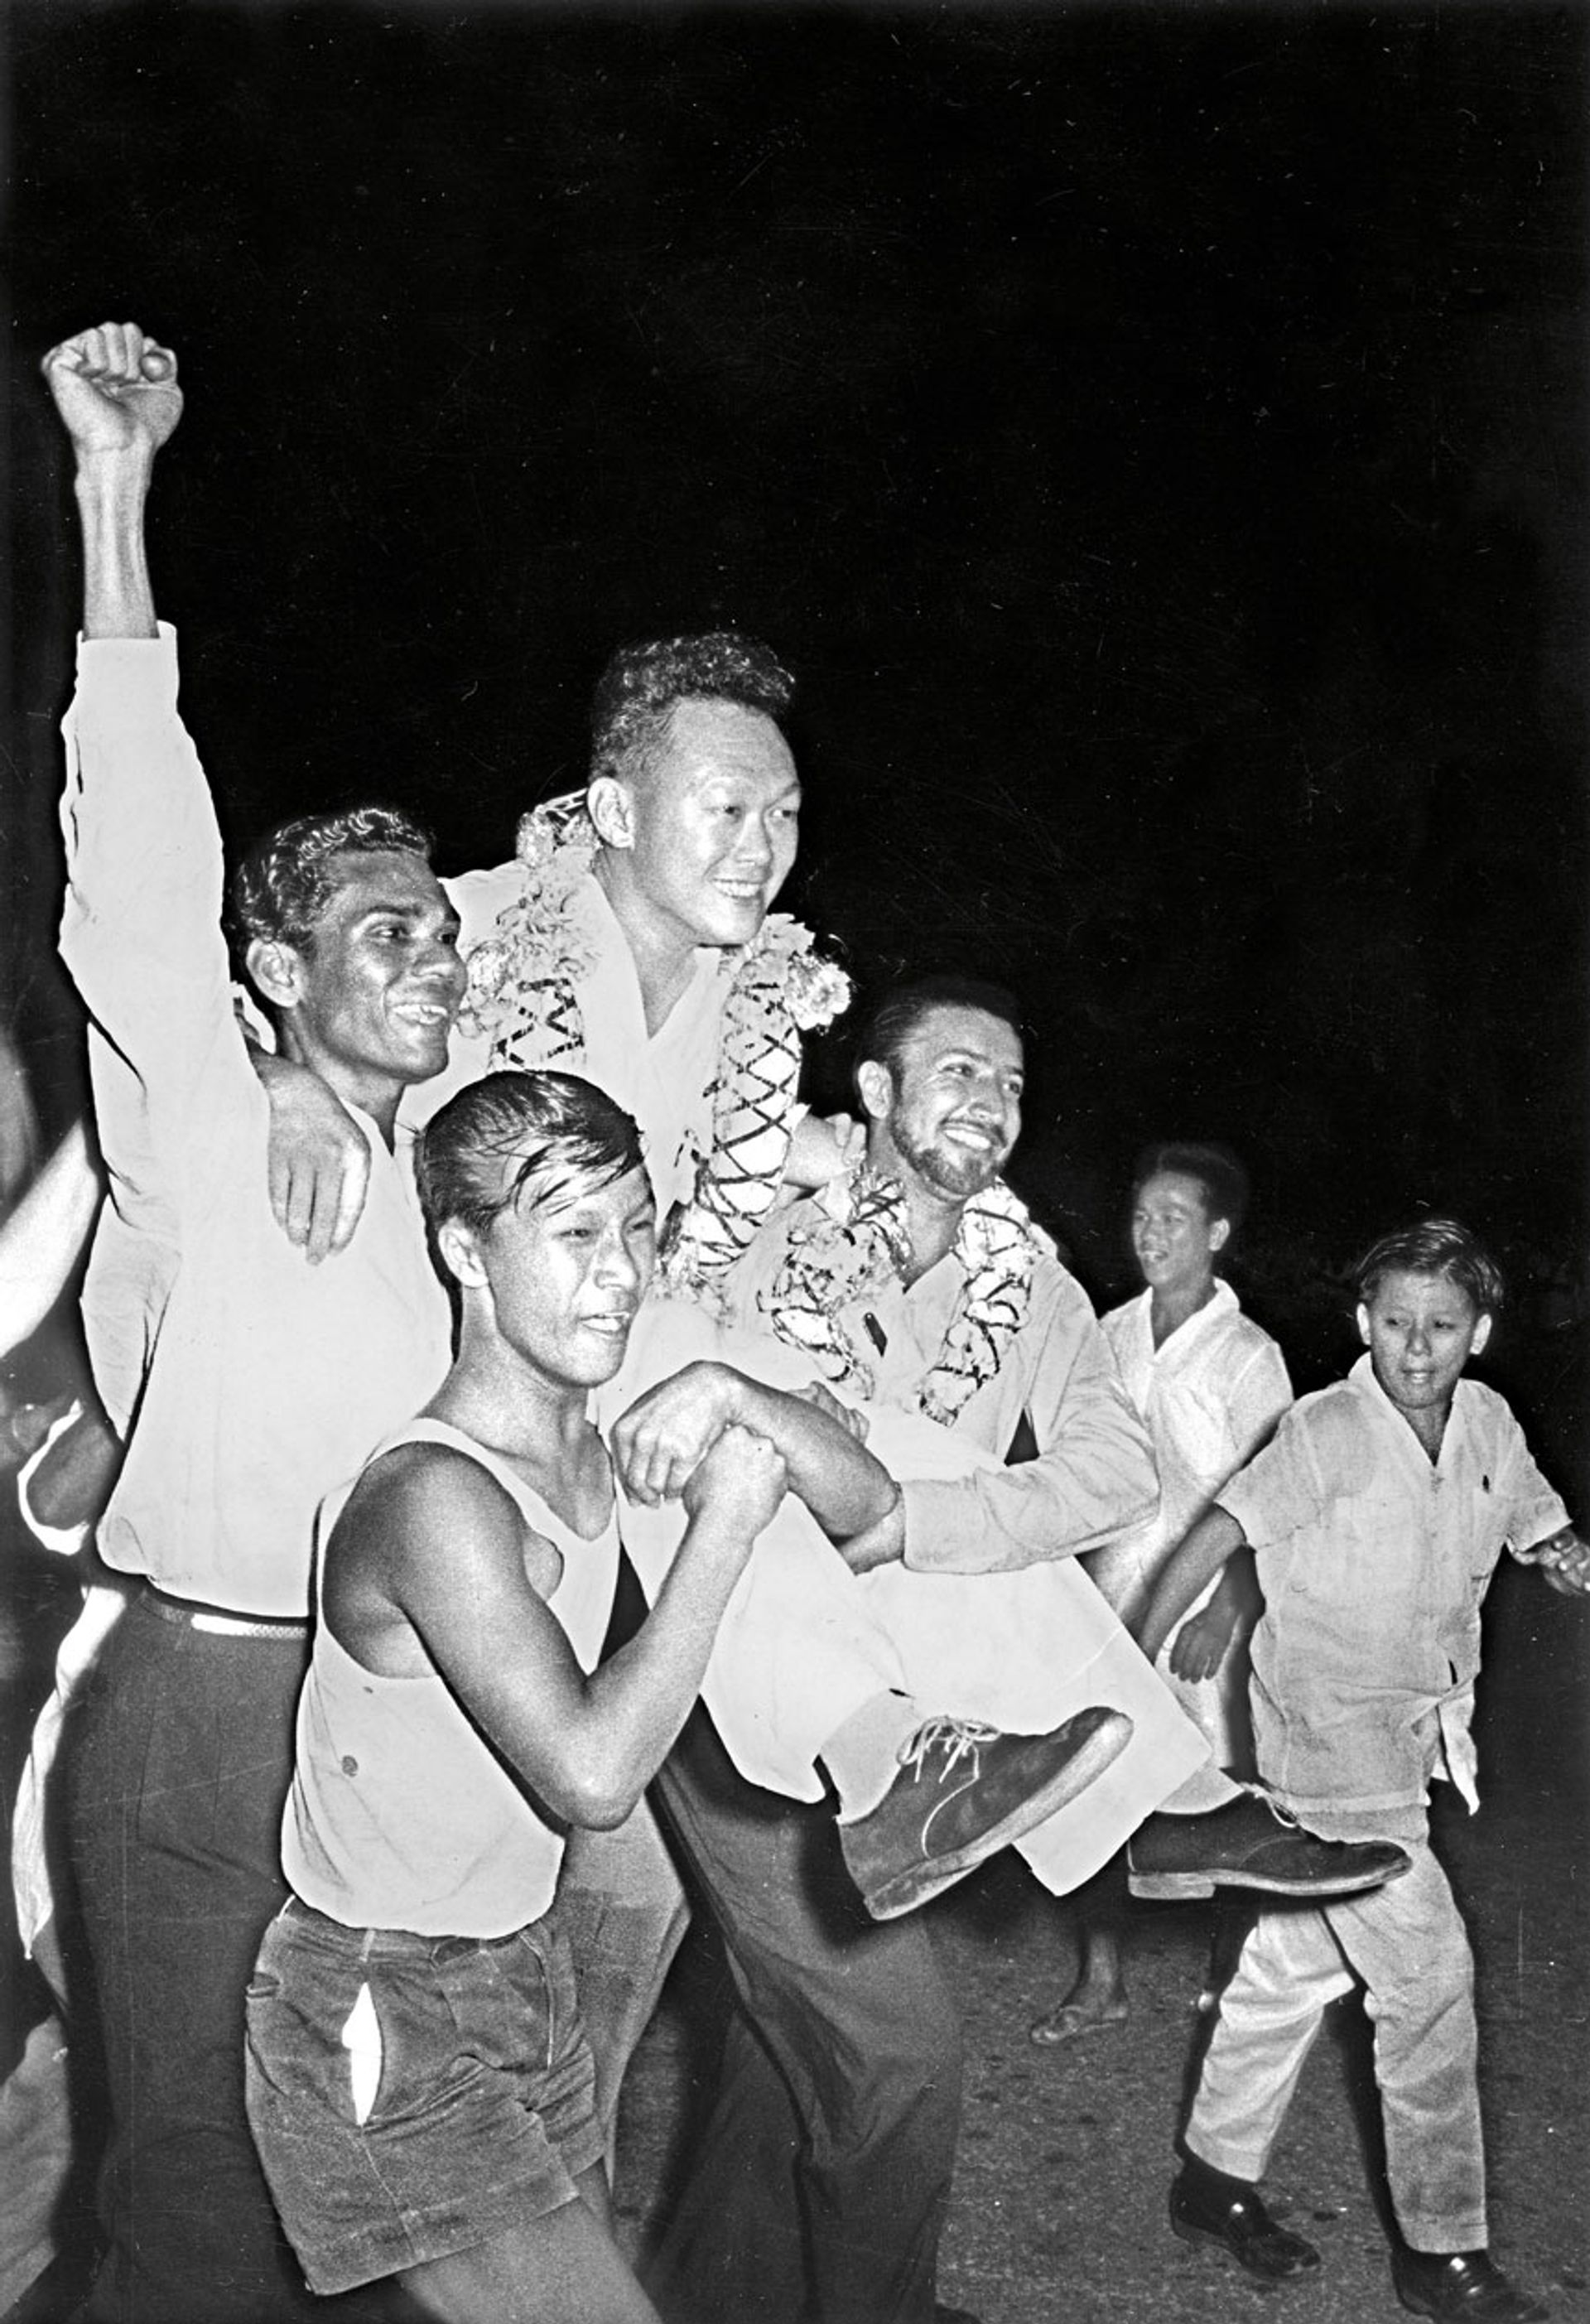 Jubilant supporters carrying a victorious Mr Lee after the People’s Action Party won 43 of 51 seats at the Legislative Assembly elections on May 30, 1959. Mr Lee would become Singapore’s first prime minister. Source: MCI Collection